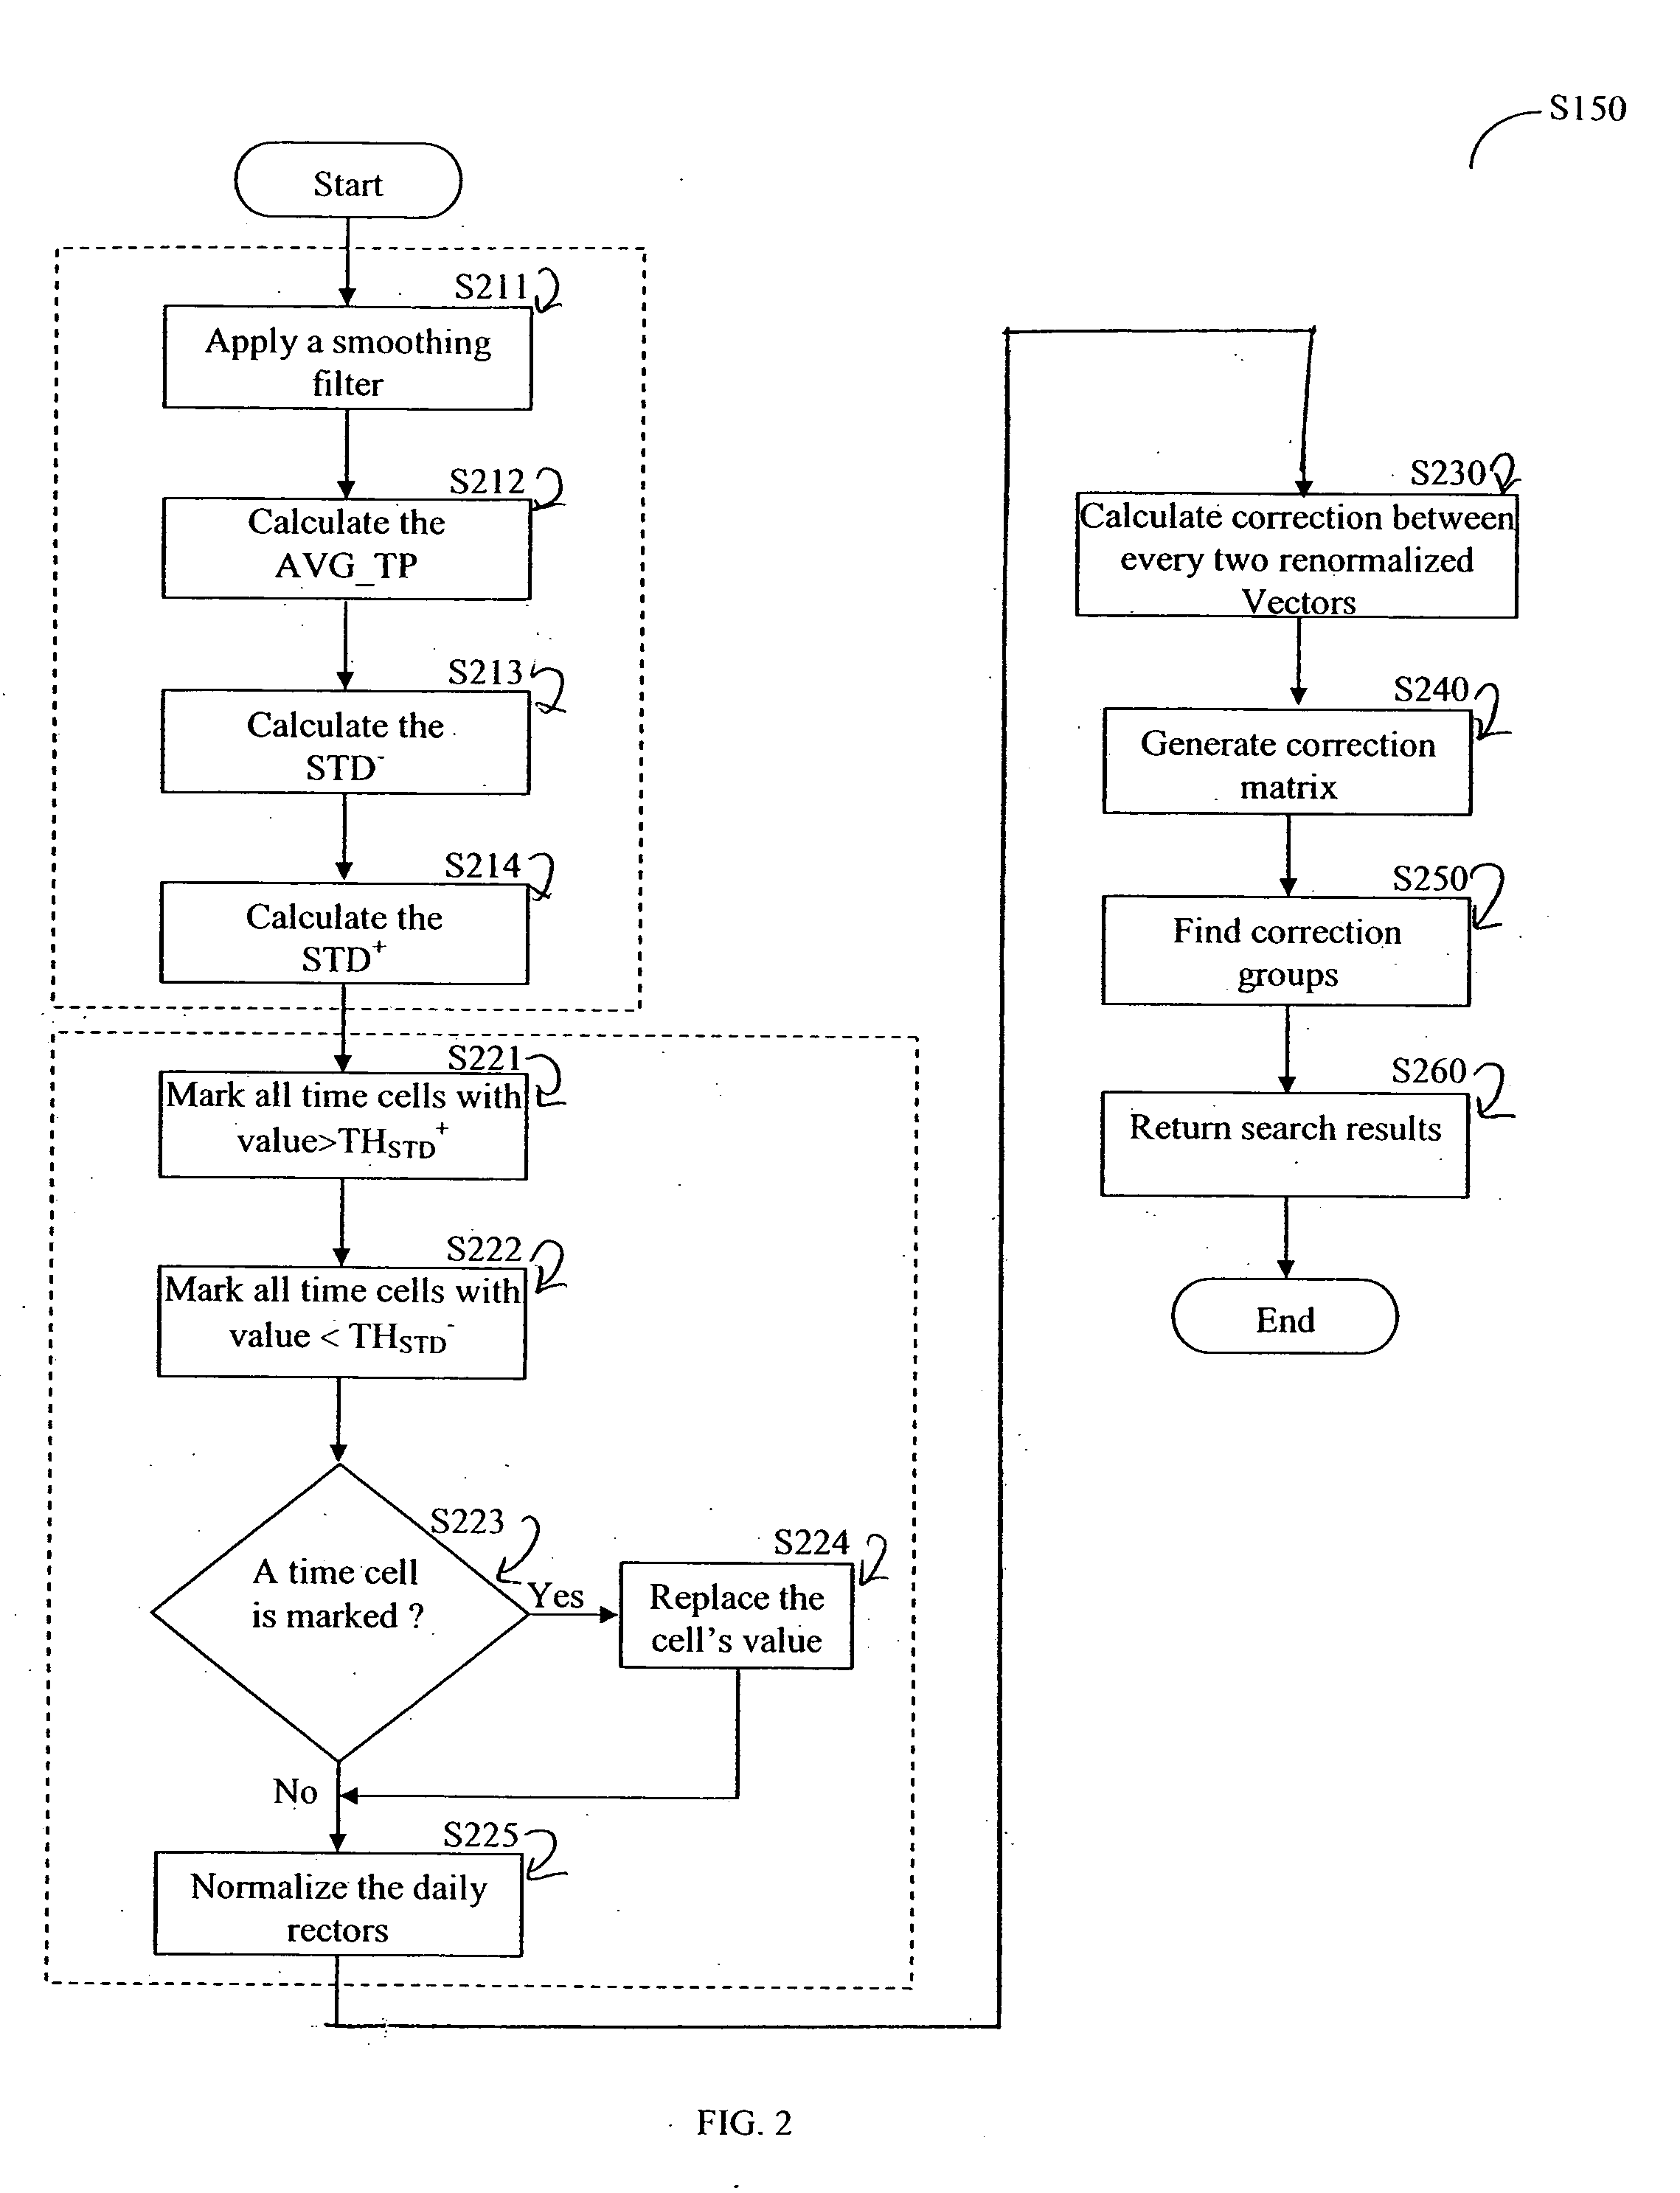 Method and apparatus for detecting abnormal behavior of enterprise software applications